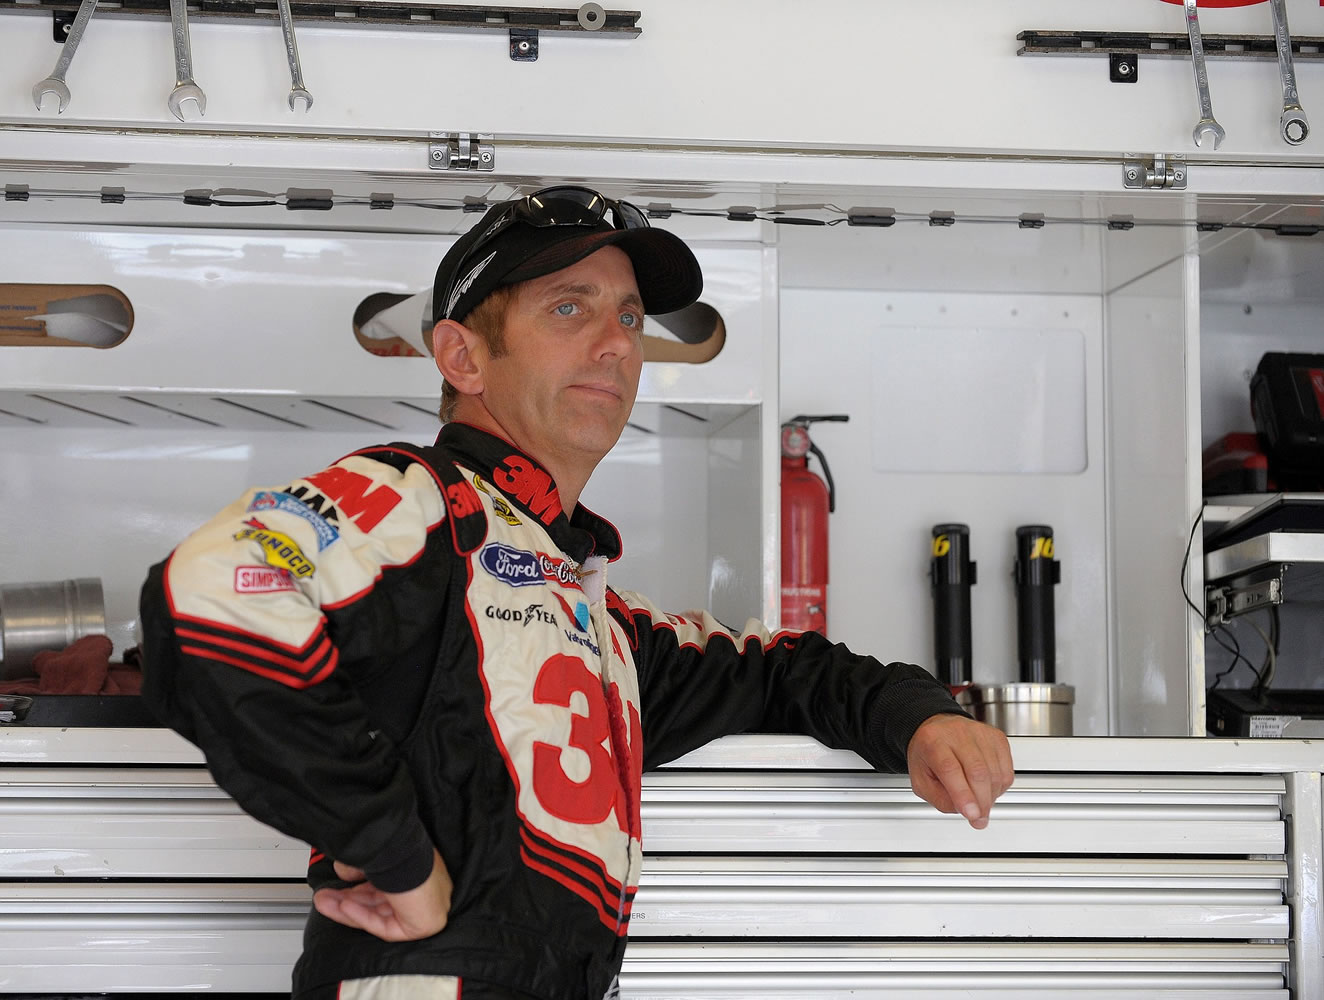 Driver Greg Biffle leans on a toolbox in the garage area before beginning practice for Sunday's NASCAR Sprint Cup Series auto race at Atlanta Motor Speedway, Saturday, Aug. 31, 2013 in Hampton, Ga.